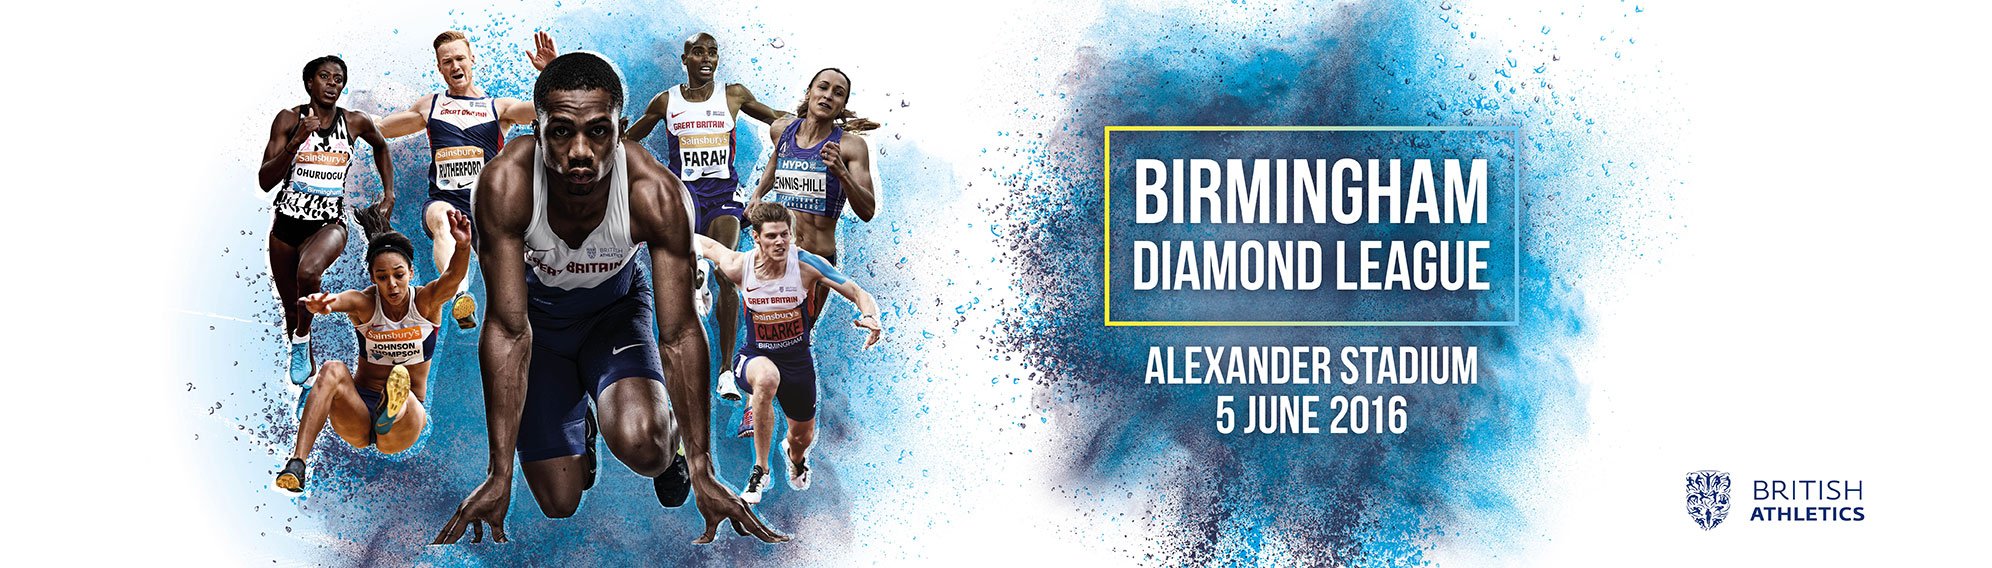 Birmingham Diamond League Recap David Rudisha Runs Worlds Second Fastest 600m Ever but is Nearly Beaten, Mo Farah Gets the One Record He Didnt Have, Asbel Kiprop Goes Sub-330, and the American